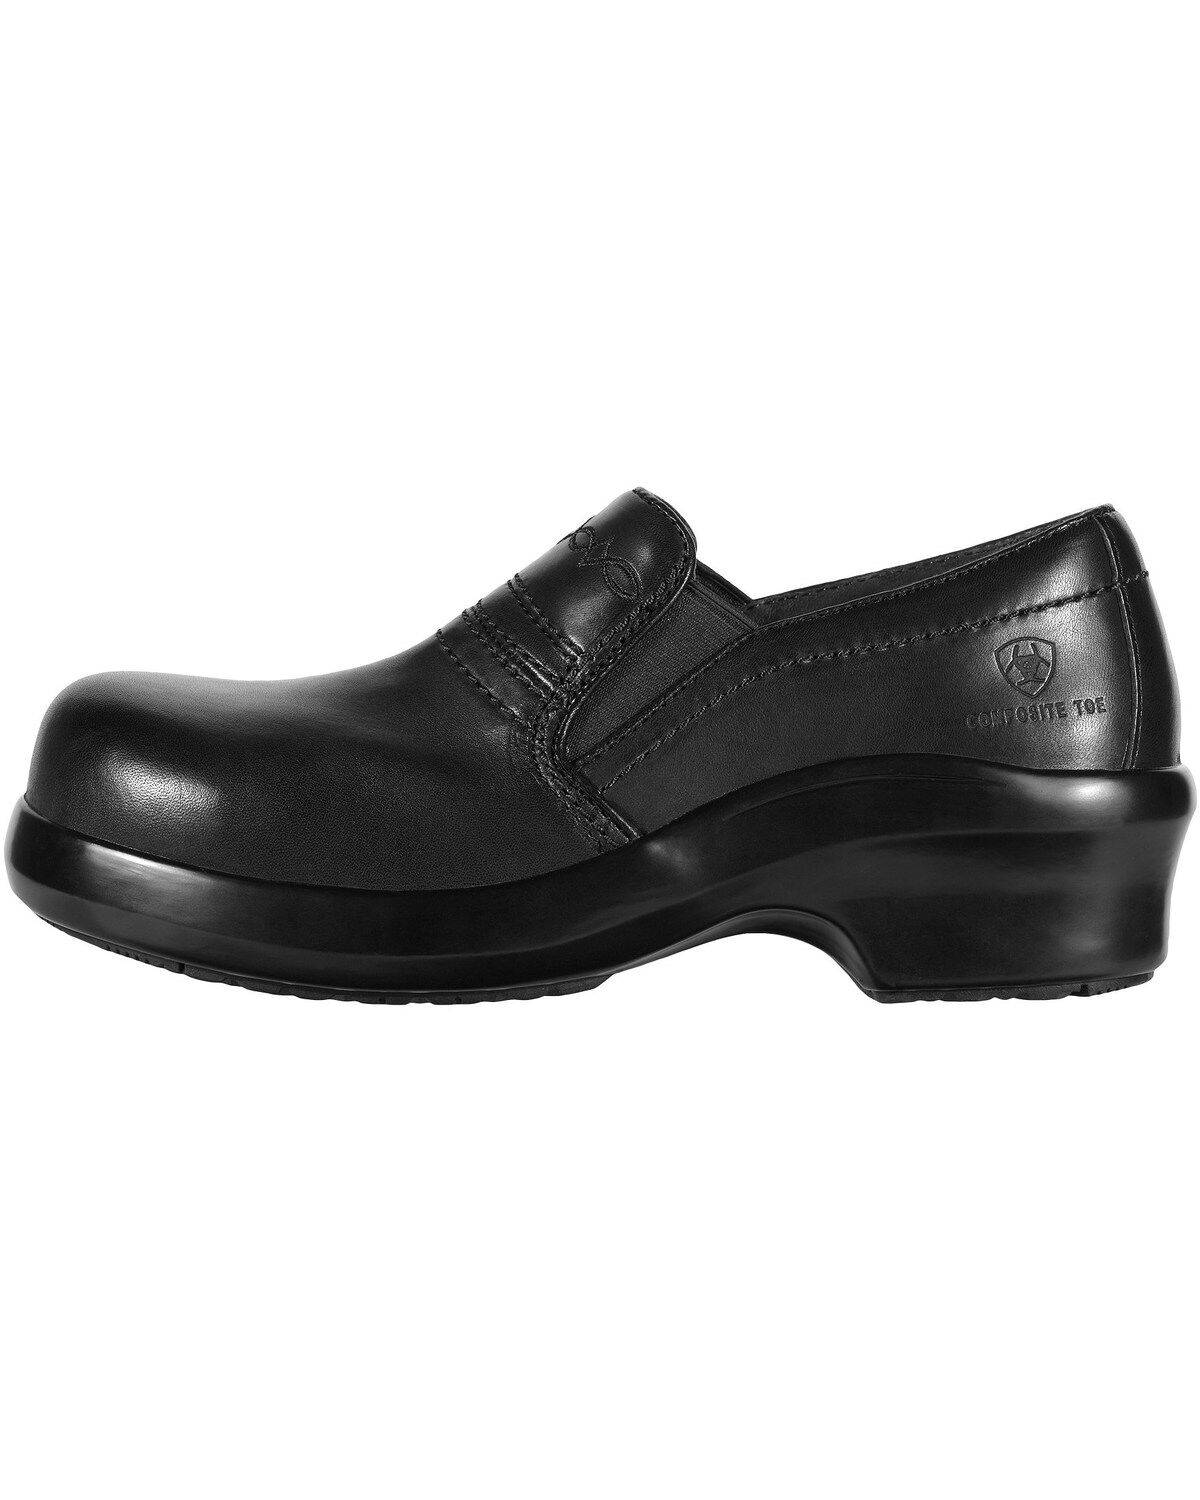 womens clogs for work